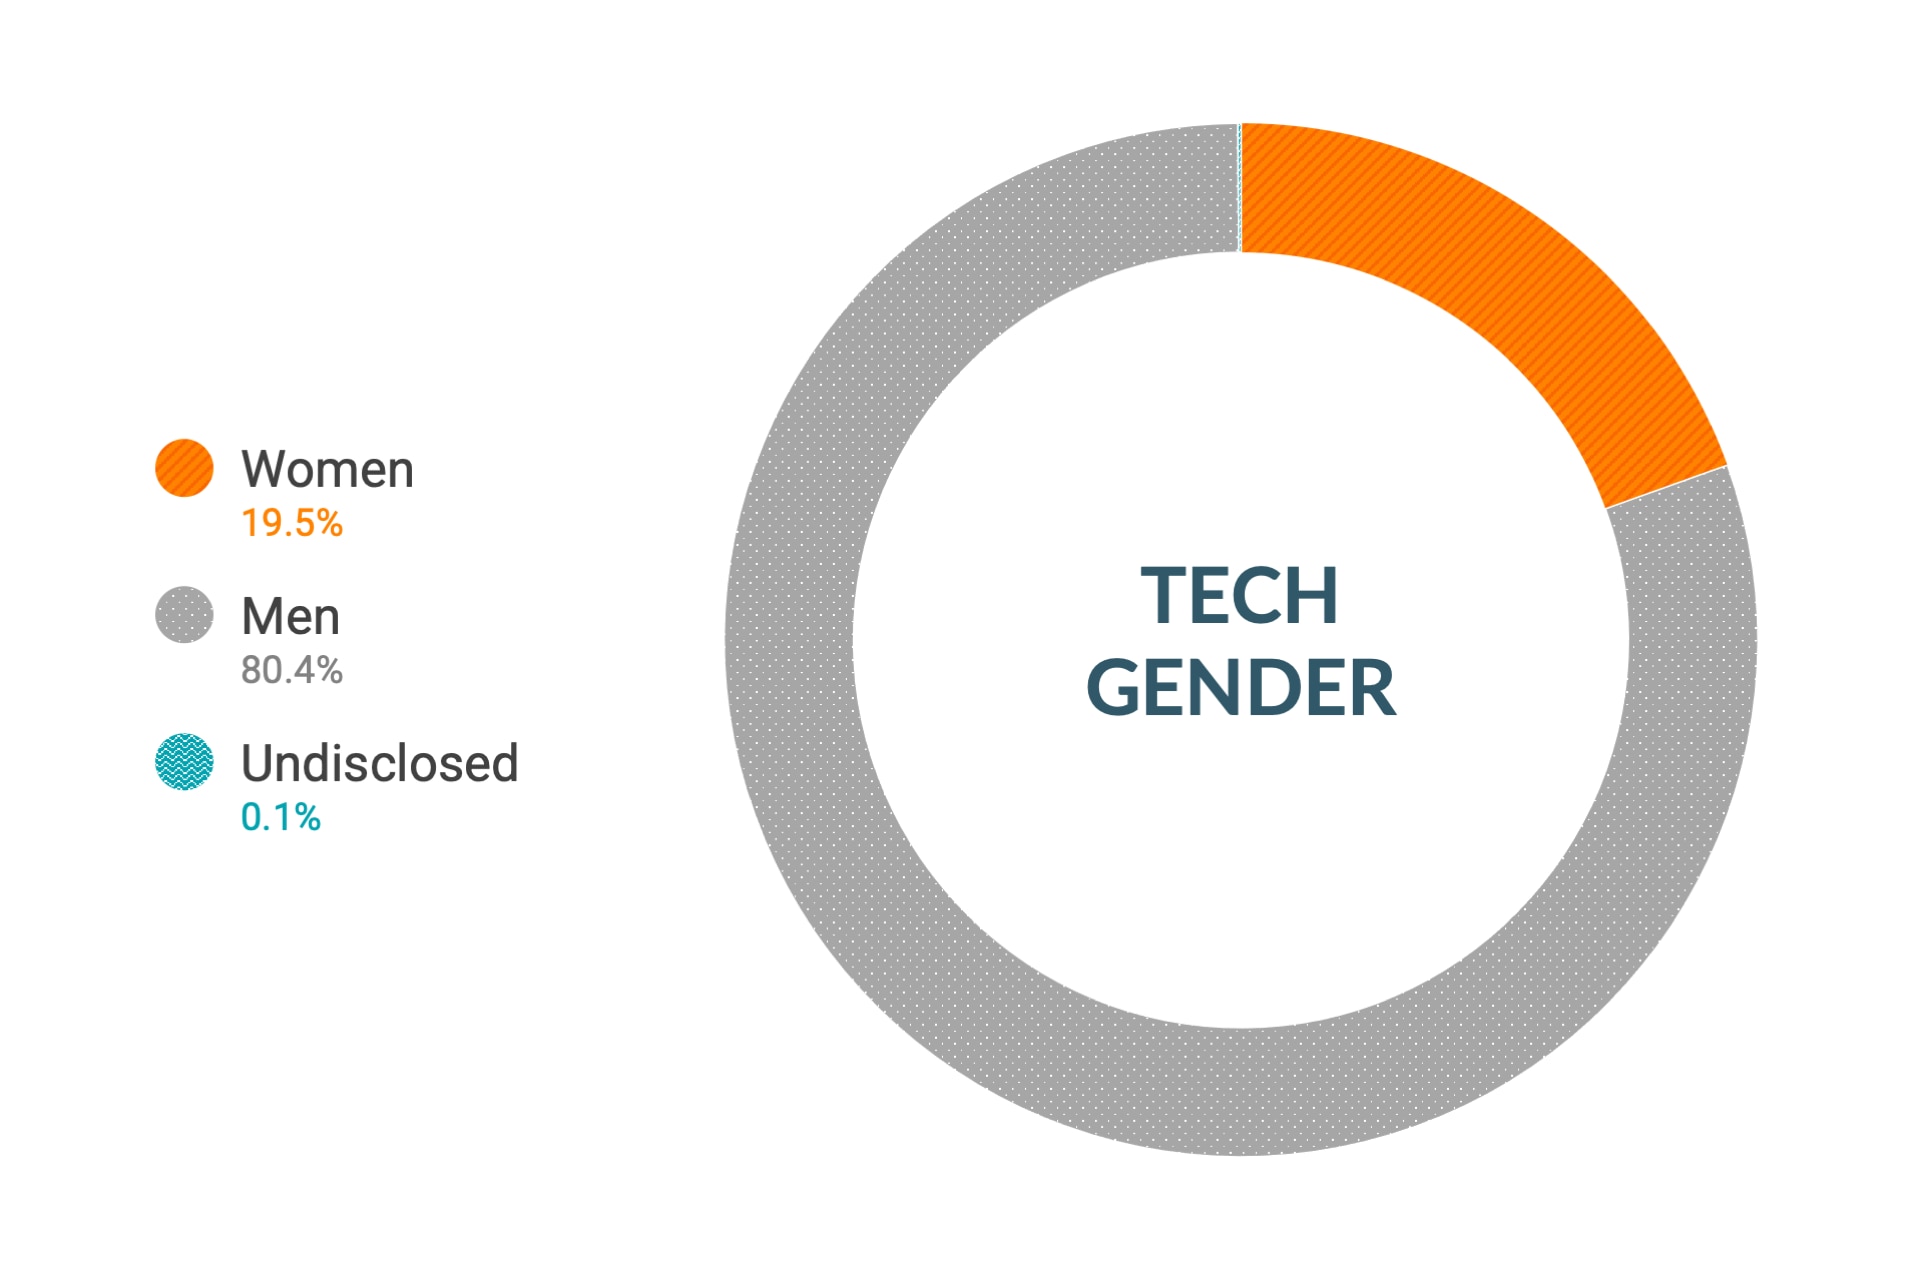 Cloudera Diversity and Inclusion data for Gender in Global Technical and Engineering Roles Roles: Women 16.6%, Men 83.3%, Undisclosed 0.1%